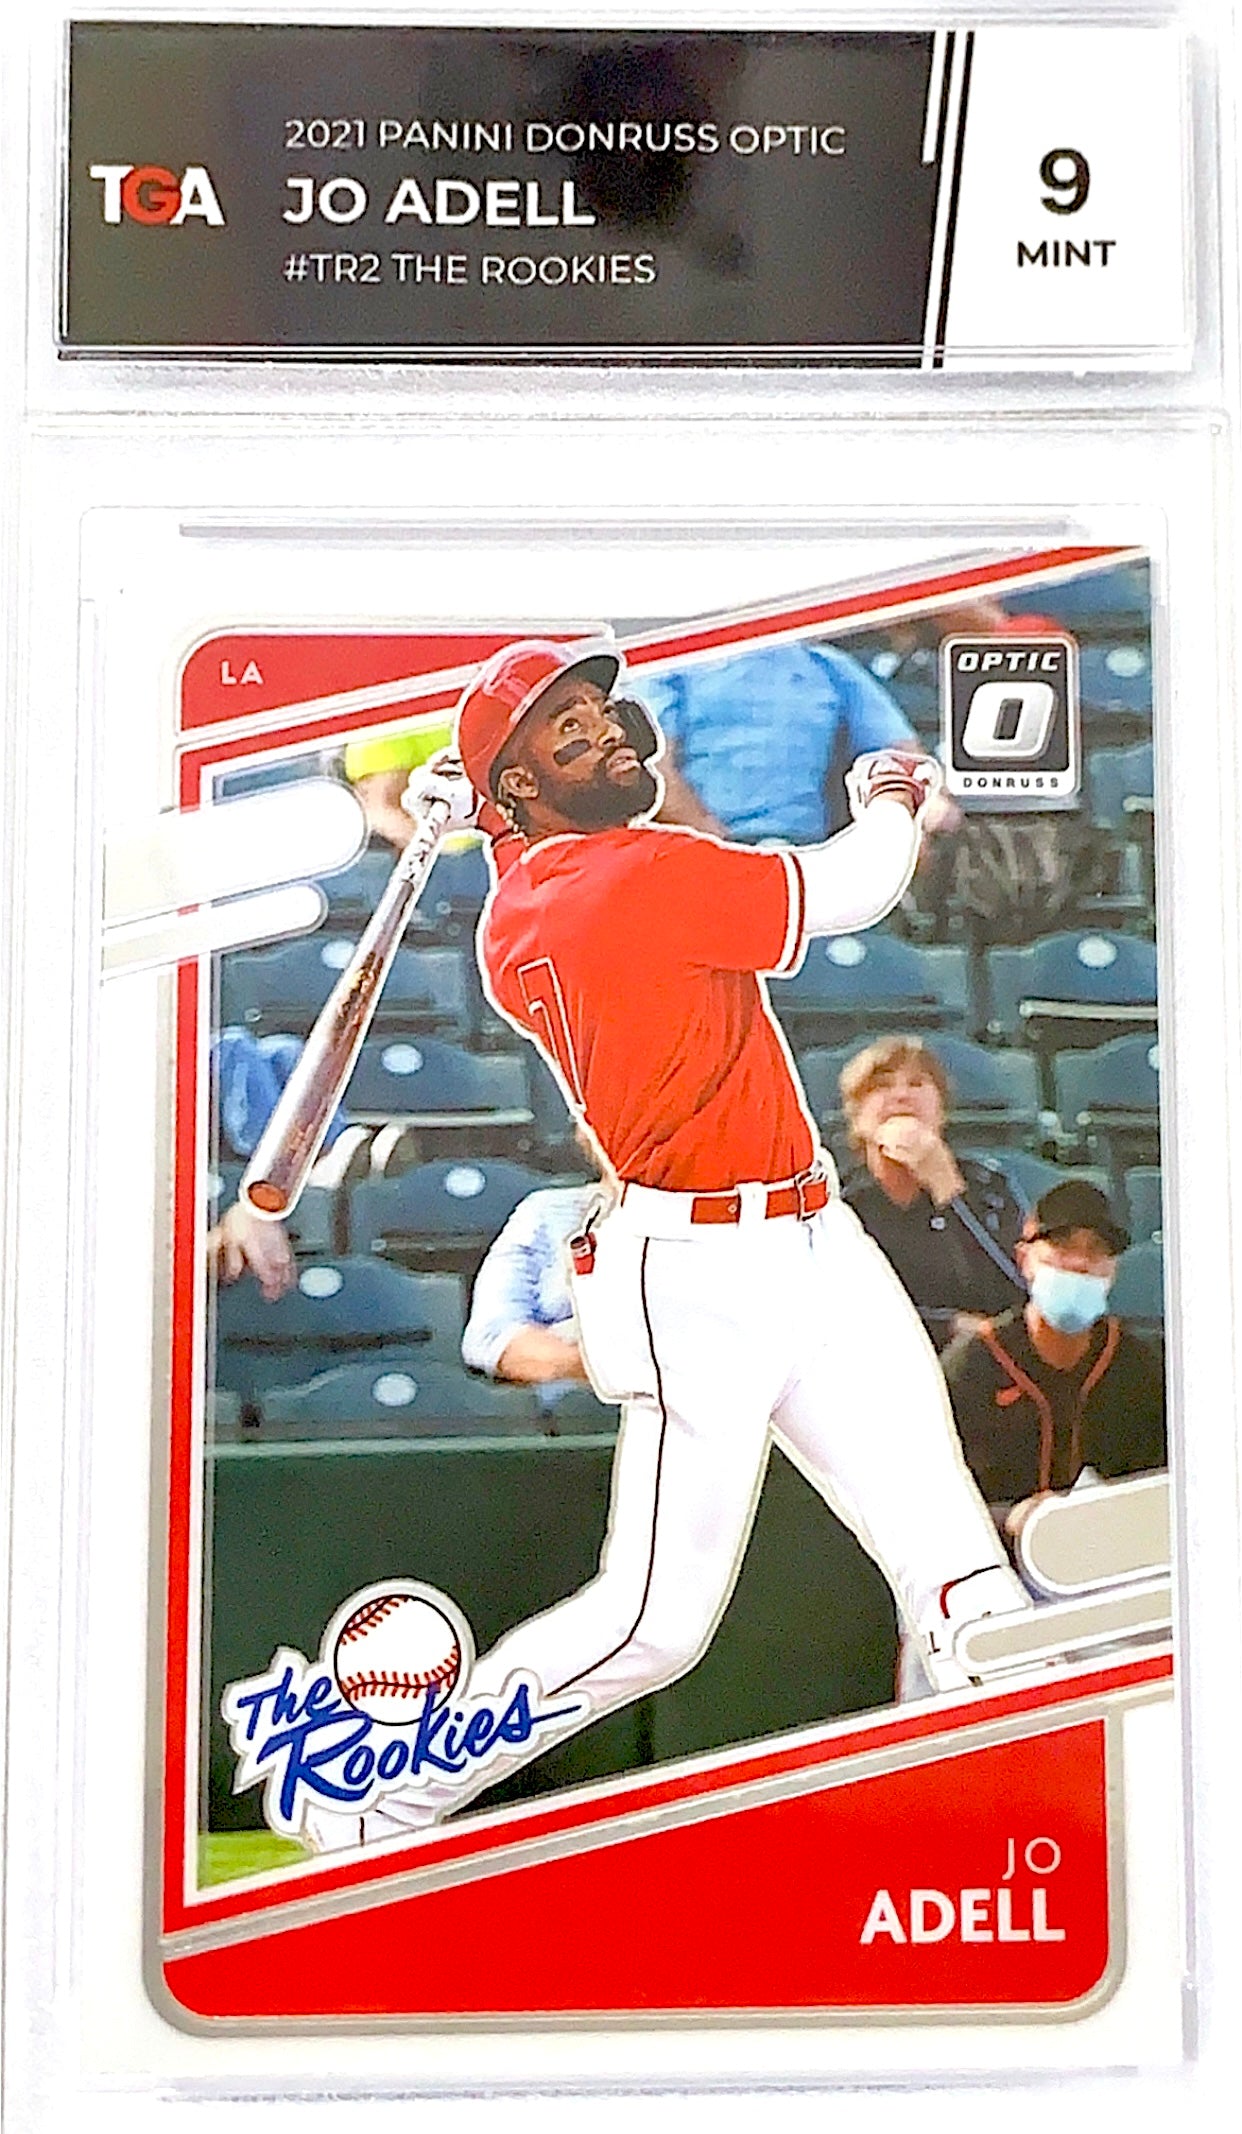 2021 Optic The Rookie Jo Adell RC TGA 9